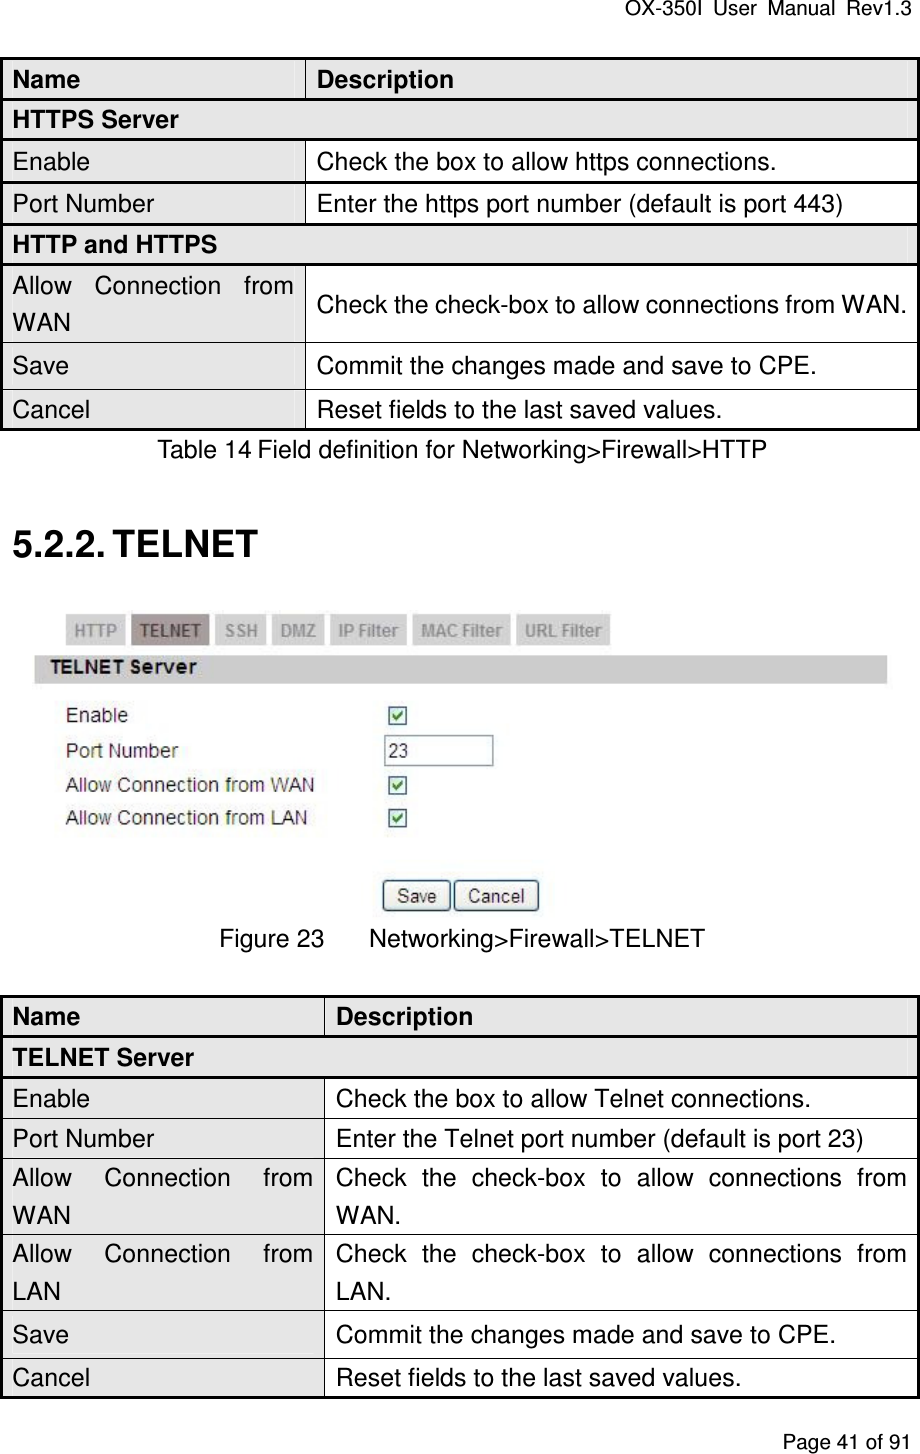 OX-350I  User  Manual  Rev1.3 Page 41 of 91 Name  Description HTTPS Server Enable    Check the box to allow https connections. Port Number  Enter the https port number (default is port 443) HTTP and HTTPS Allow  Connection  from WAN  Check the check-box to allow connections from WAN. Save  Commit the changes made and save to CPE. Cancel  Reset fields to the last saved values. Table 14 Field definition for Networking&gt;Firewall&gt;HTTP 5.2.2. TELNET  Figure 23  Networking&gt;Firewall&gt;TELNET Name  Description TELNET Server Enable    Check the box to allow Telnet connections. Port Number  Enter the Telnet port number (default is port 23) Allow  Connection  from WAN Check  the  check-box  to  allow  connections  from WAN. Allow  Connection  from LAN Check  the  check-box  to  allow  connections  from LAN. Save  Commit the changes made and save to CPE. Cancel  Reset fields to the last saved values. 